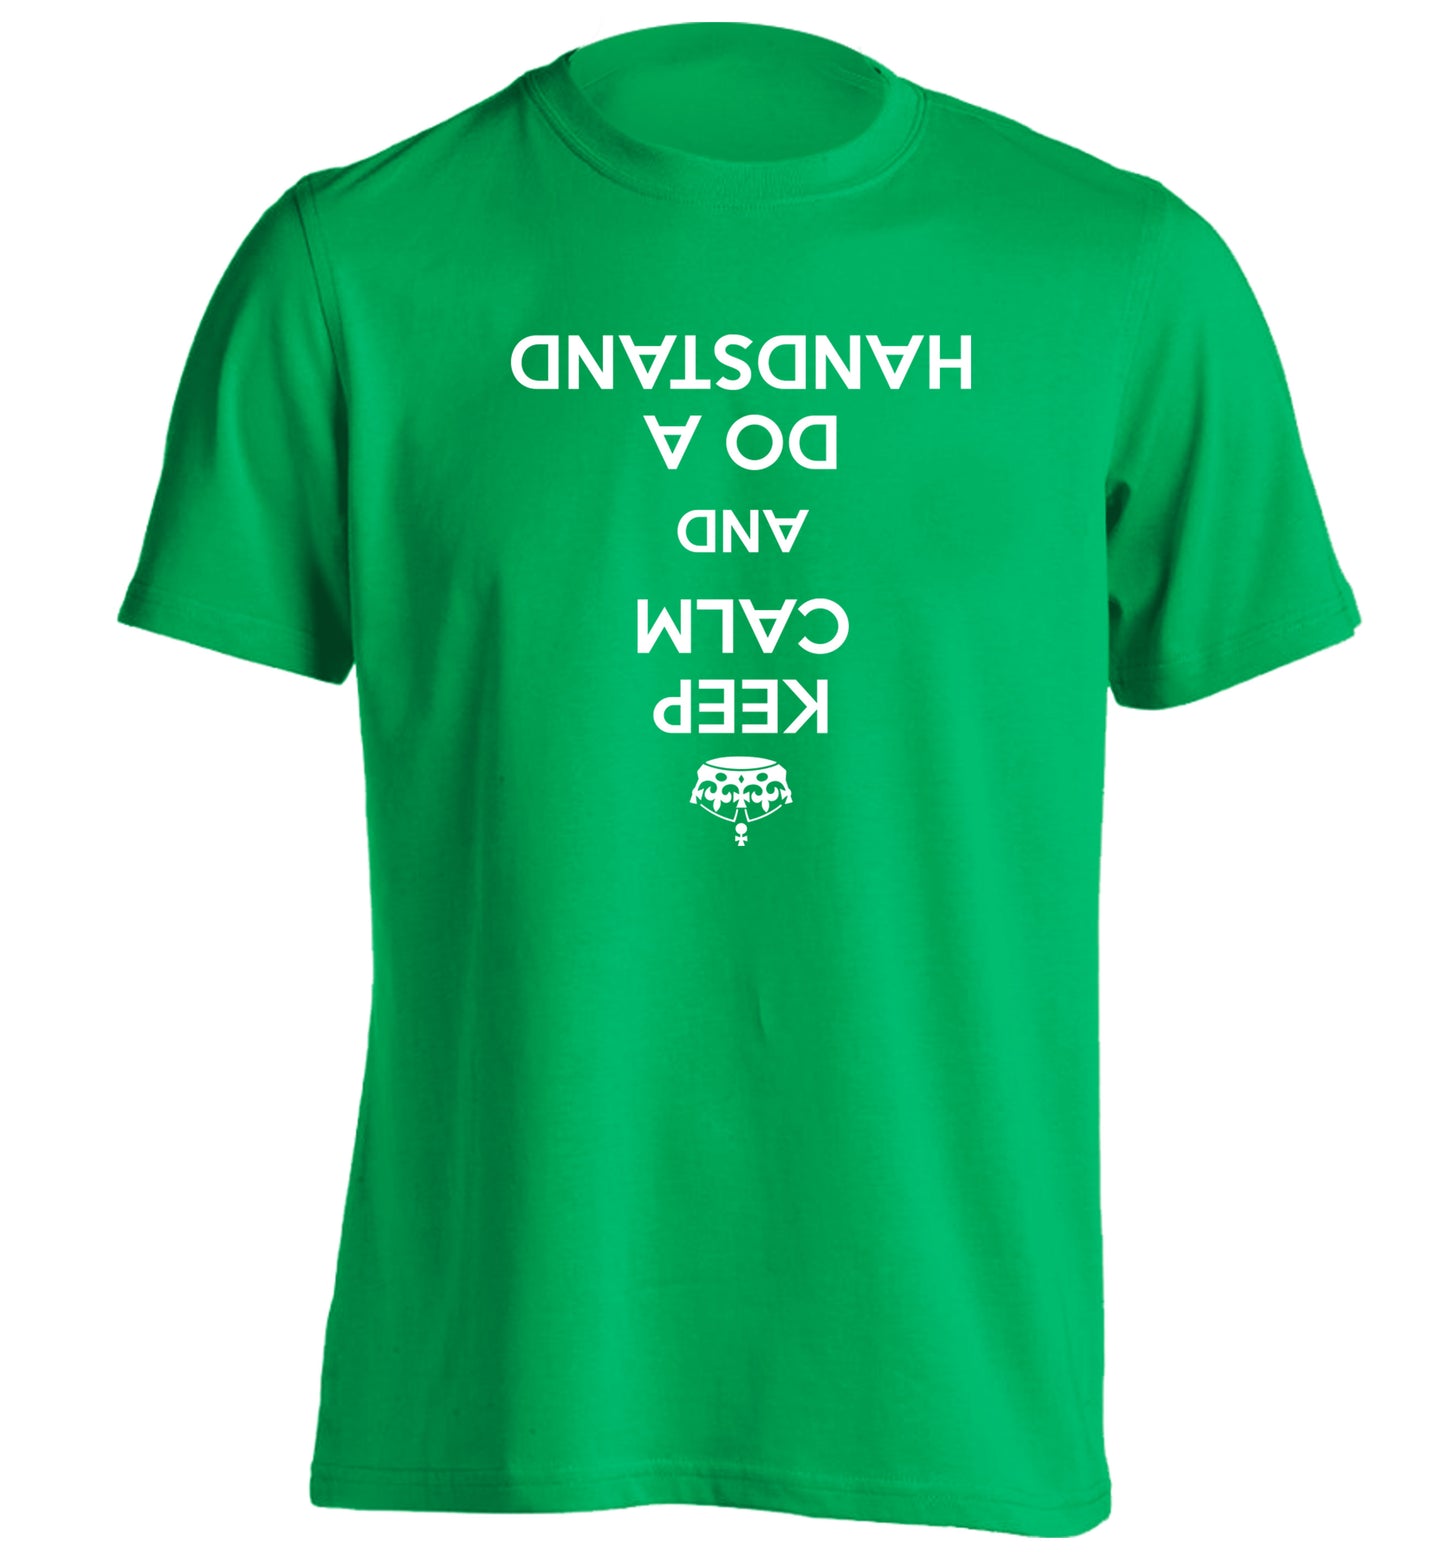 Keep calm and do a handstand adults unisex green Tshirt 2XL